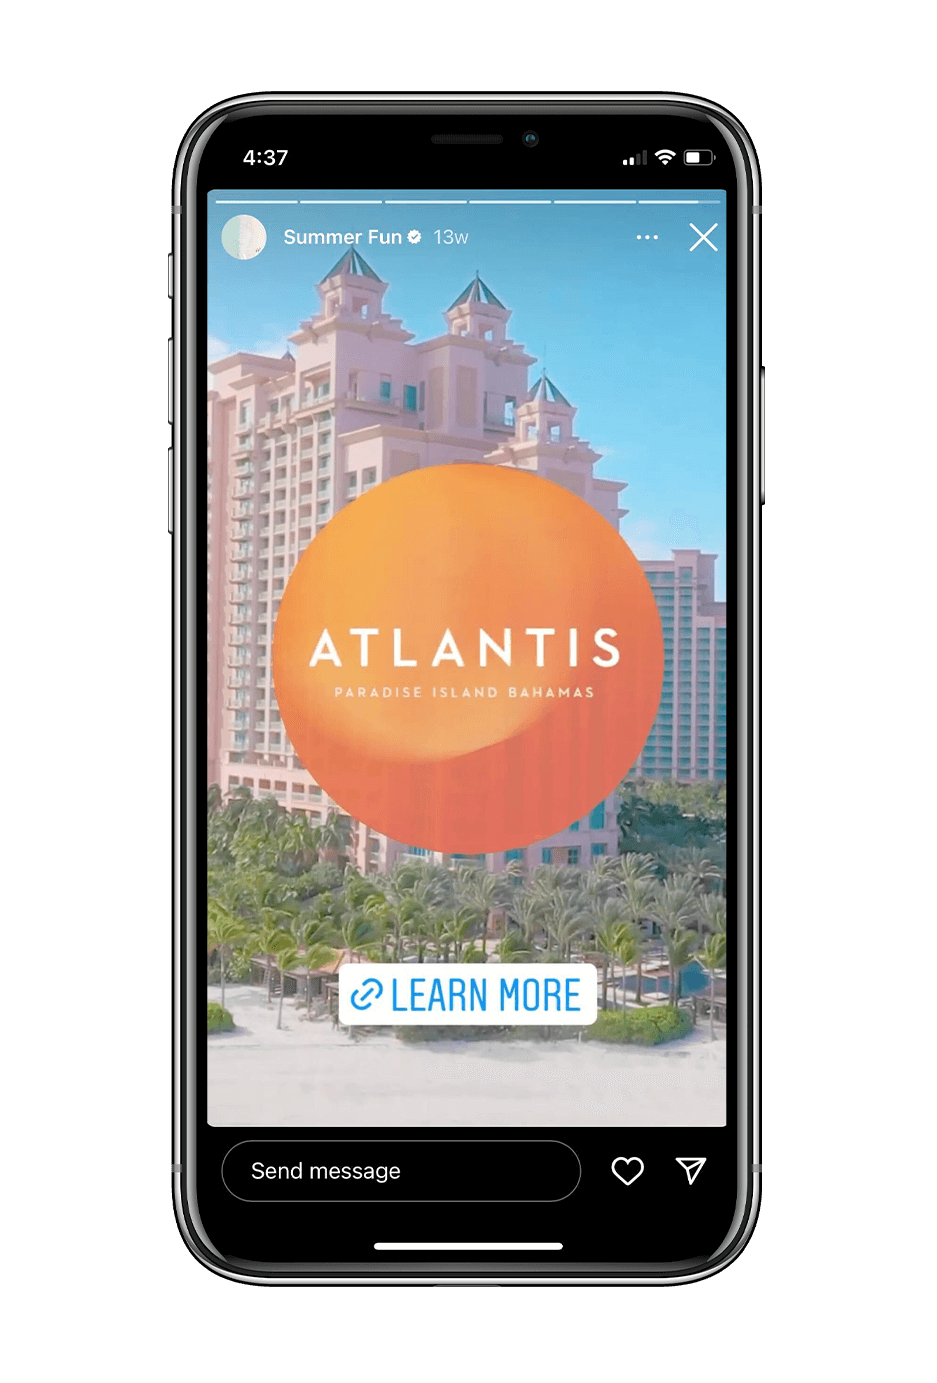 Mockup of iphone showing an example of an Atlantis Bahamas instagram story